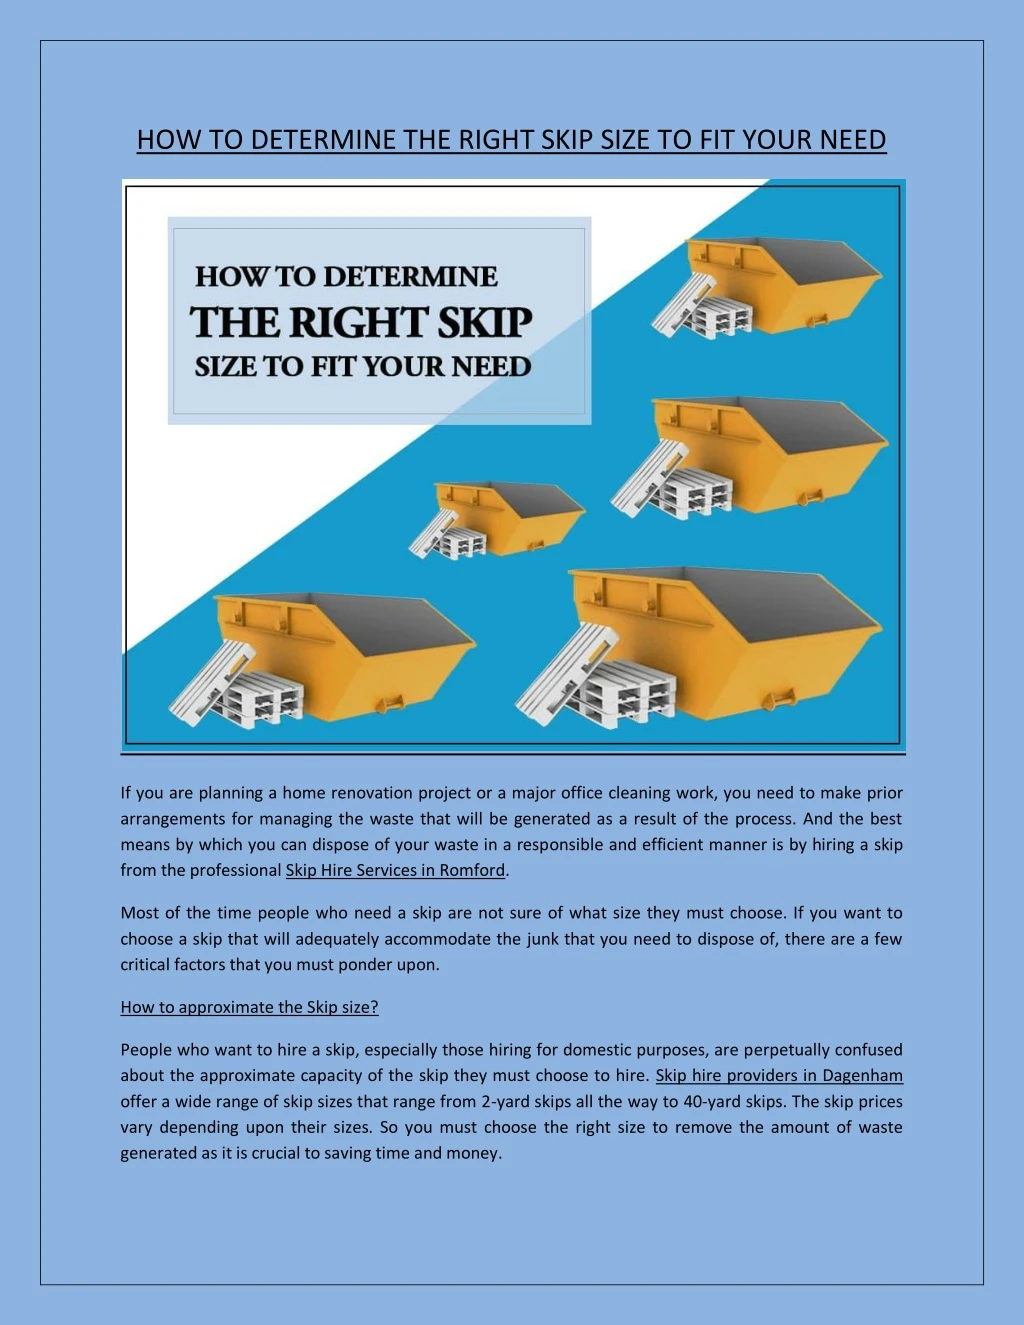 how to determine the right skip size to fit your